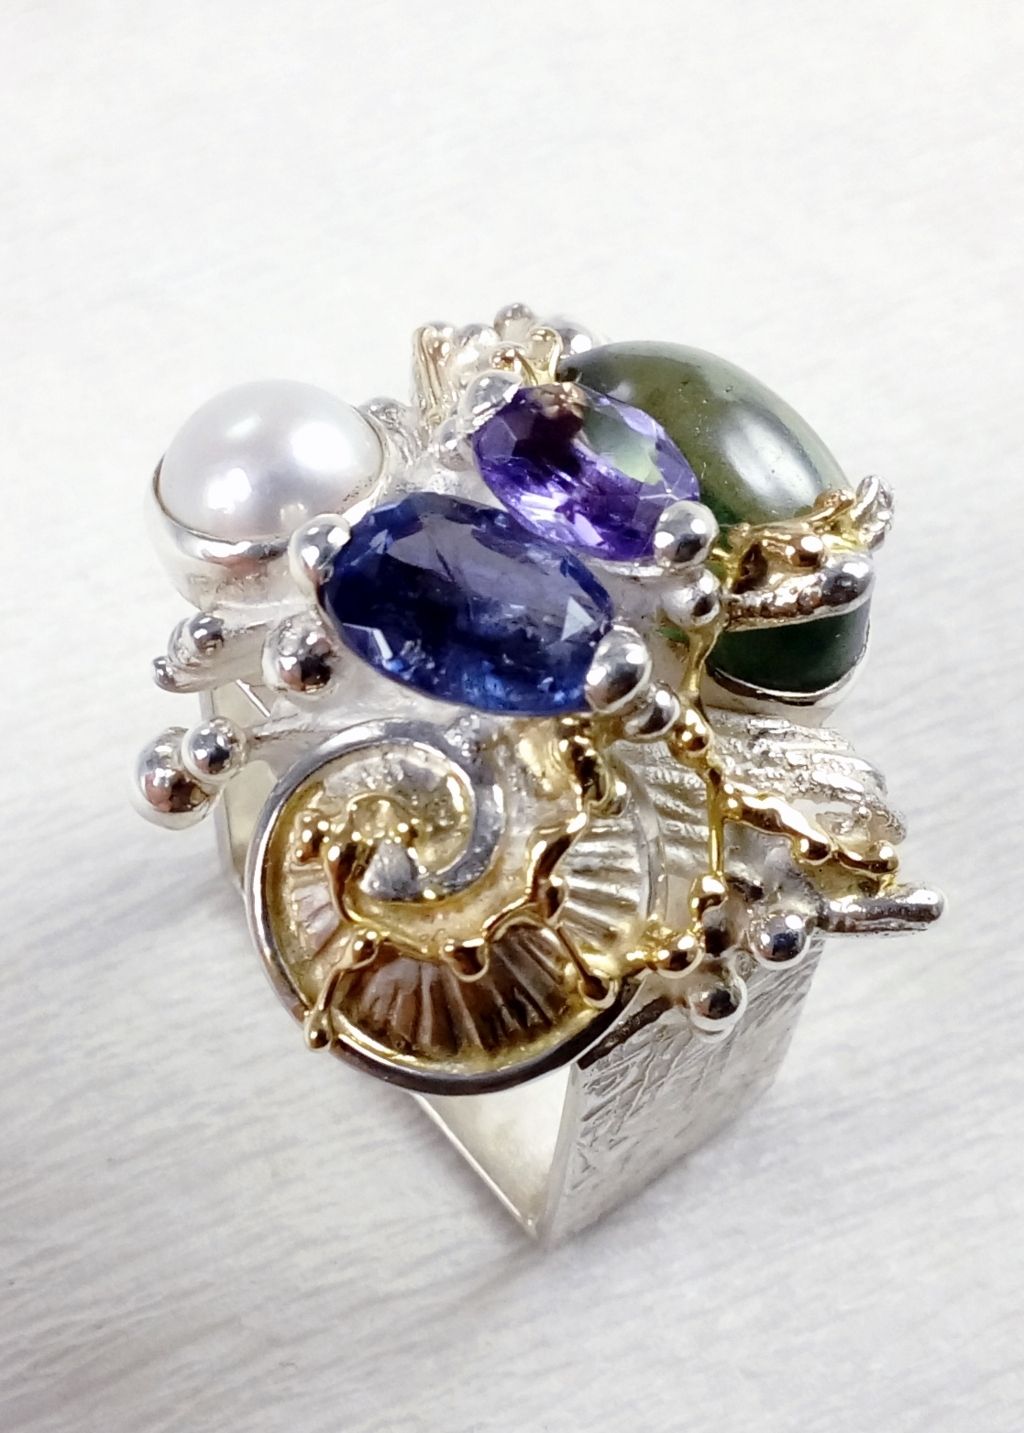 jewelry made from gold and silver, jewelry with color stones, jewelry with real pearls, gregory pyra piro square ring 4821, where to find an auction house with gemstones and jewellery, fine craft gallery handcrafted ring for sale, sterling silver and 14 karat gold ring, ring with amethyst, fluorite, iolite and pearl, one of a kind handcrafted ring, where to find auctions with fine art and designer jewellery, where to buy gregory pyra piro jewelry right now